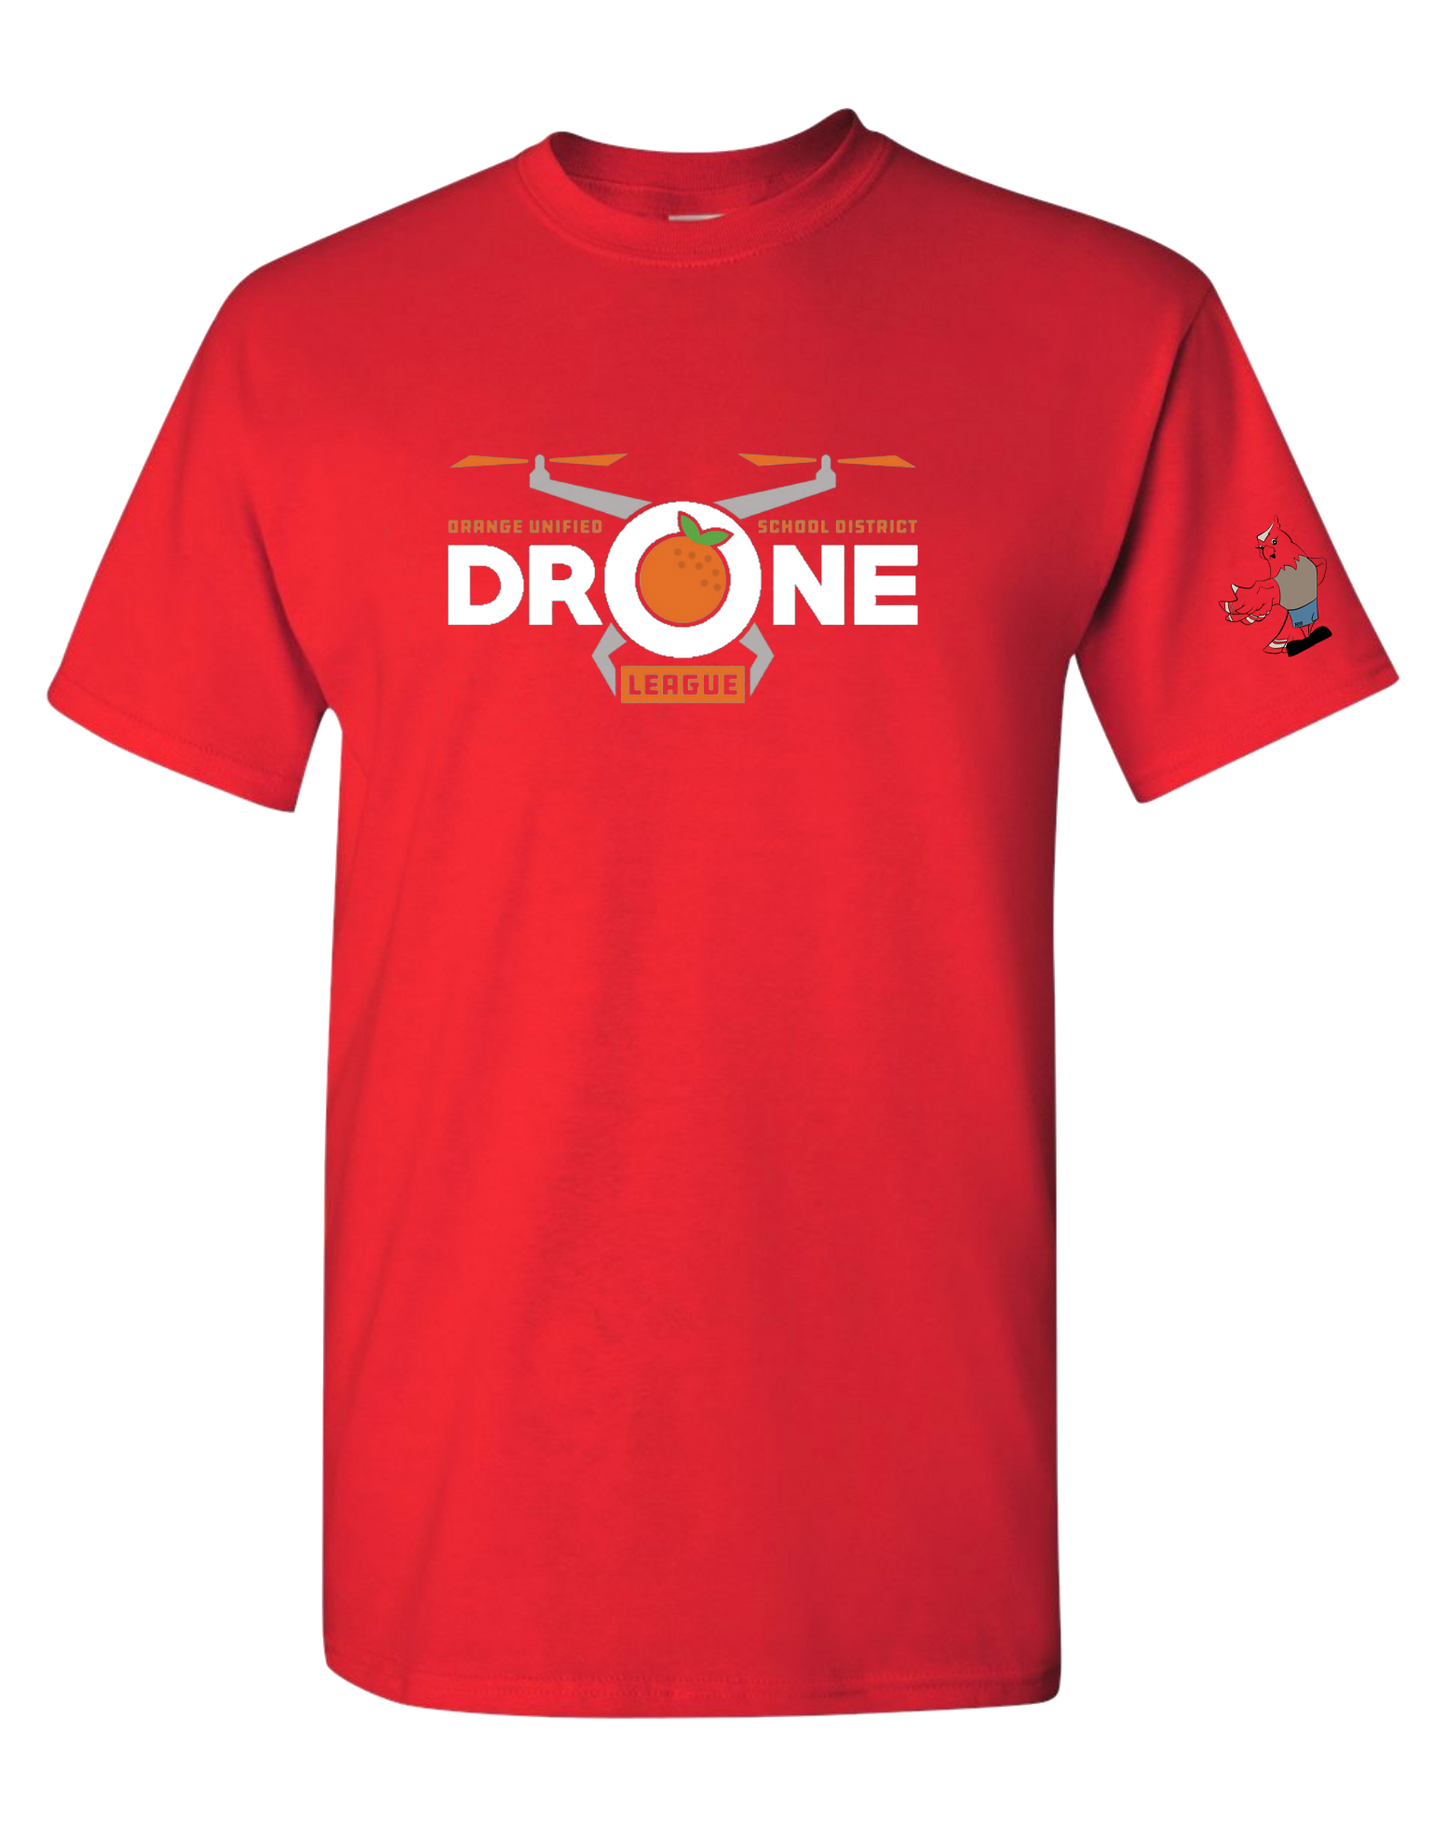 Running Springs - Drone league T-shirt (Red)